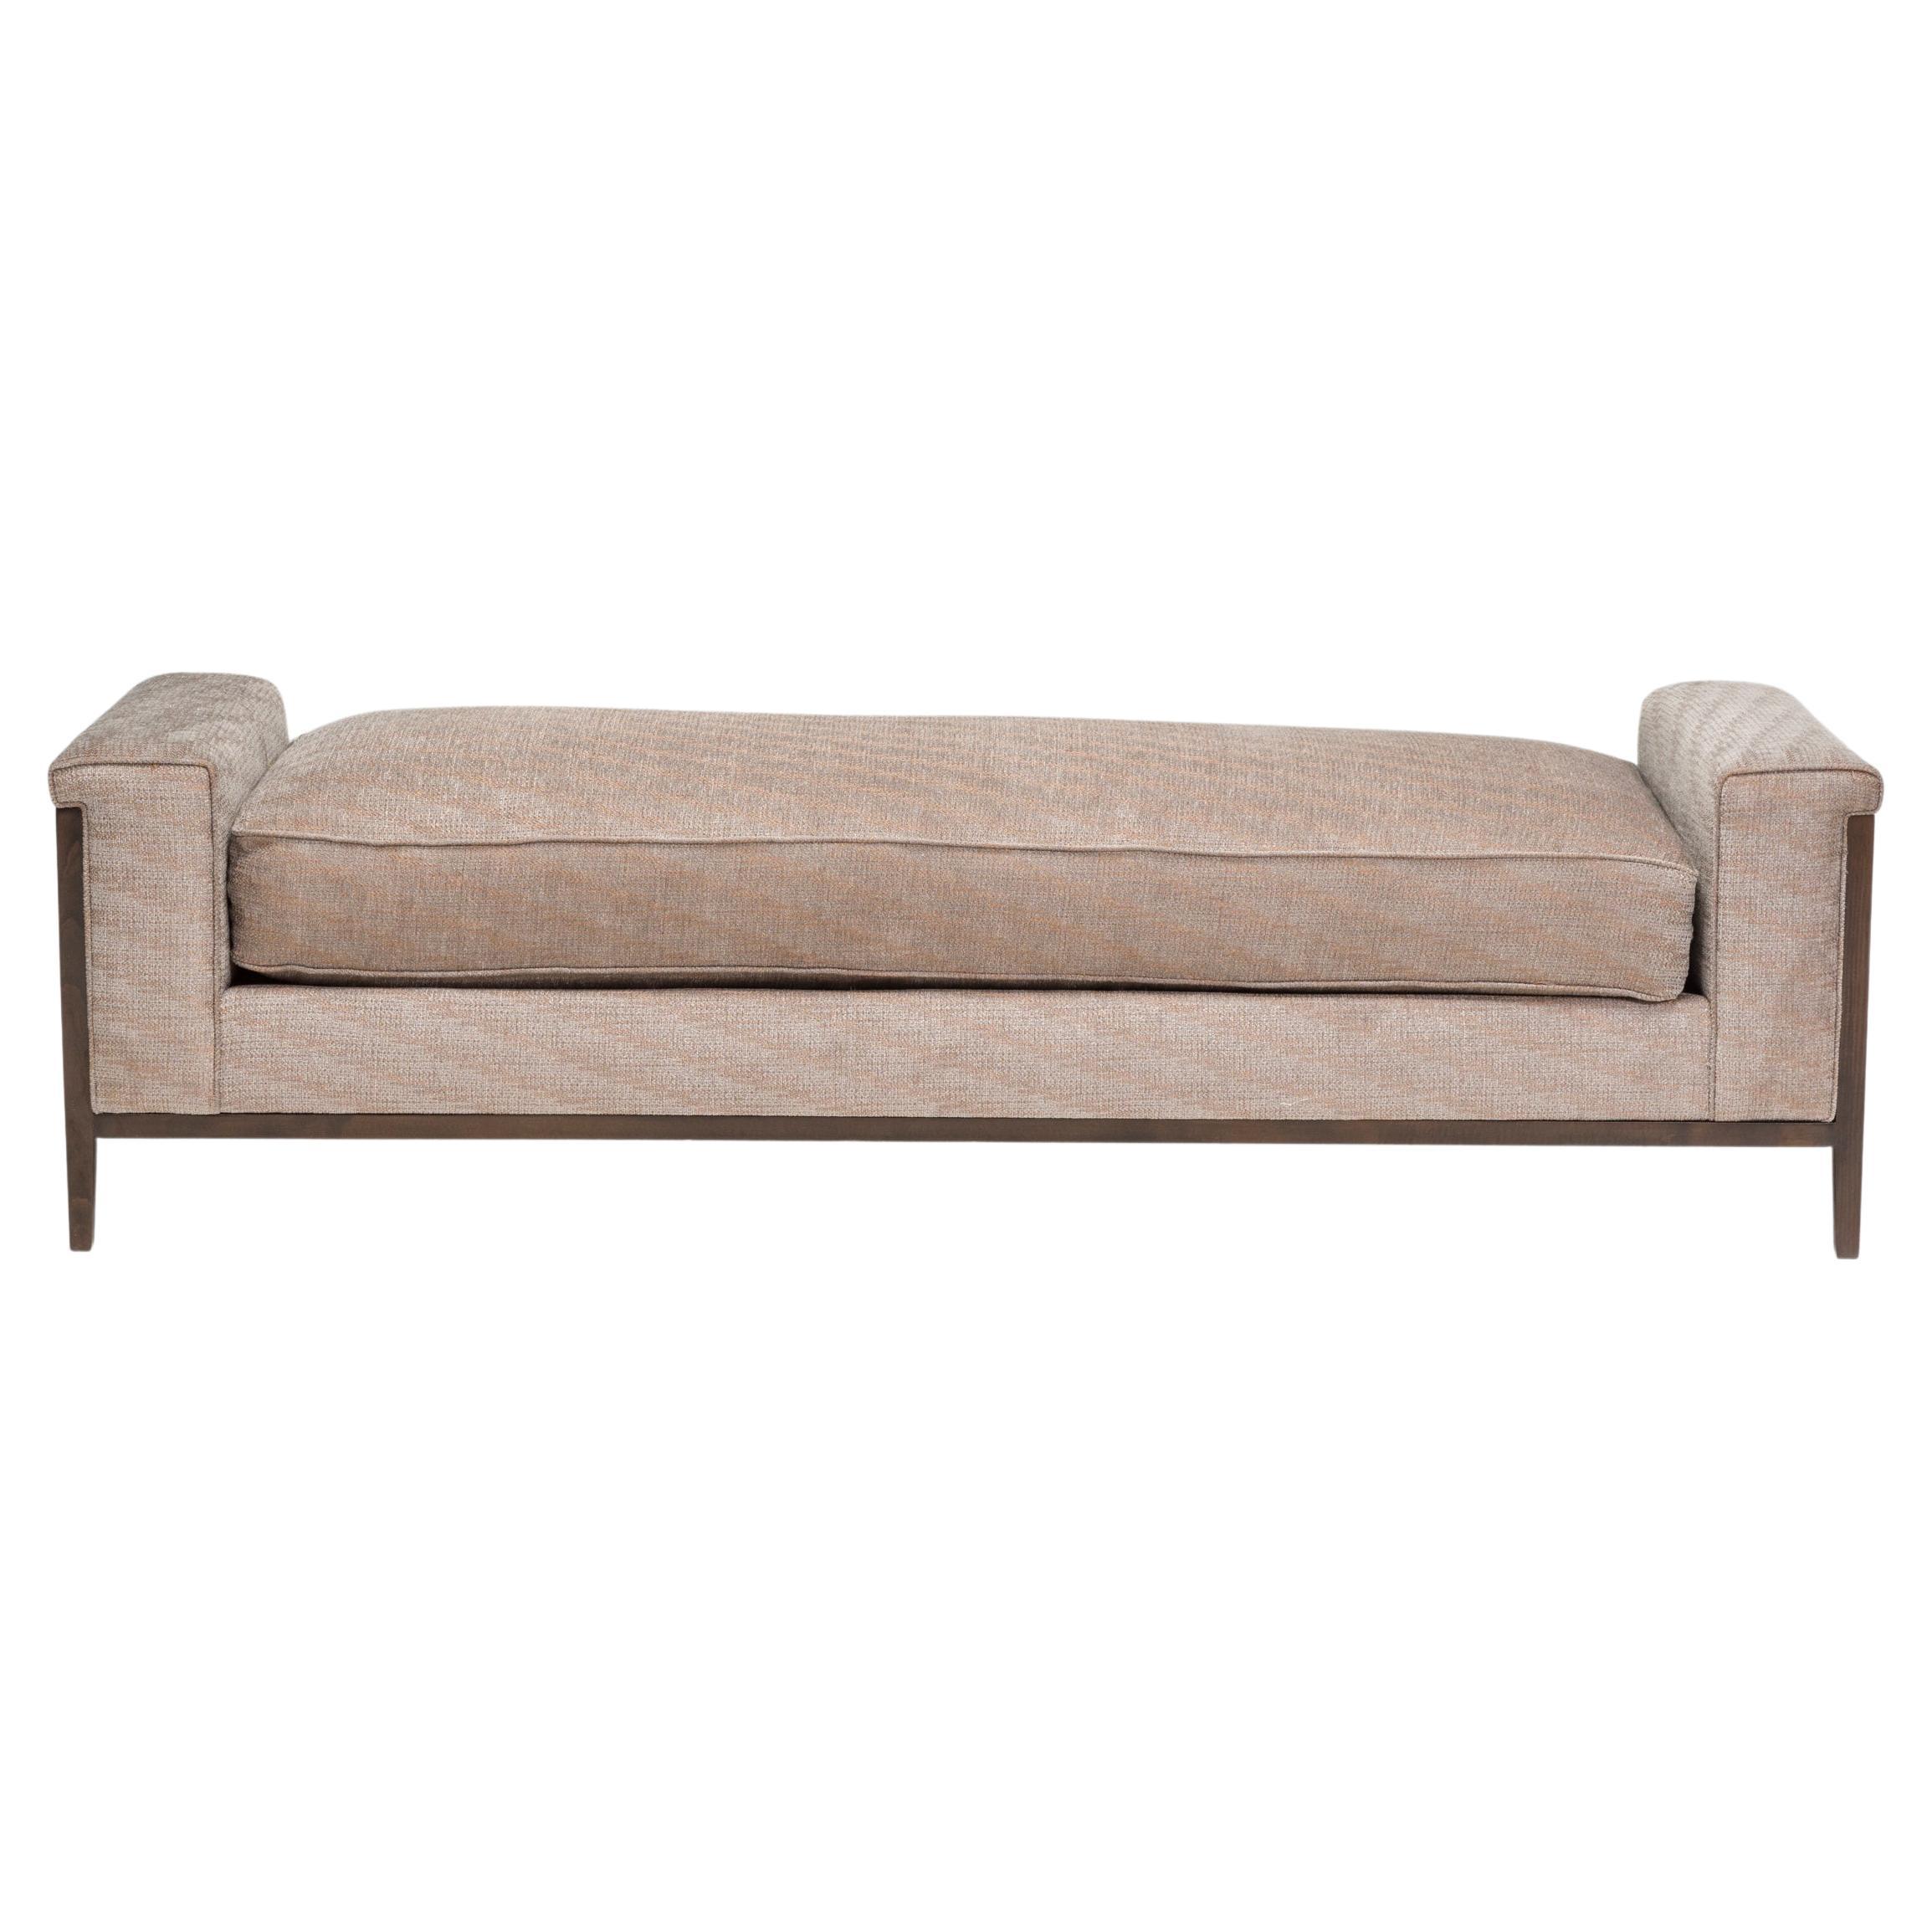 Grey Upholstered Bench with Carved Wooden Frame For Sale